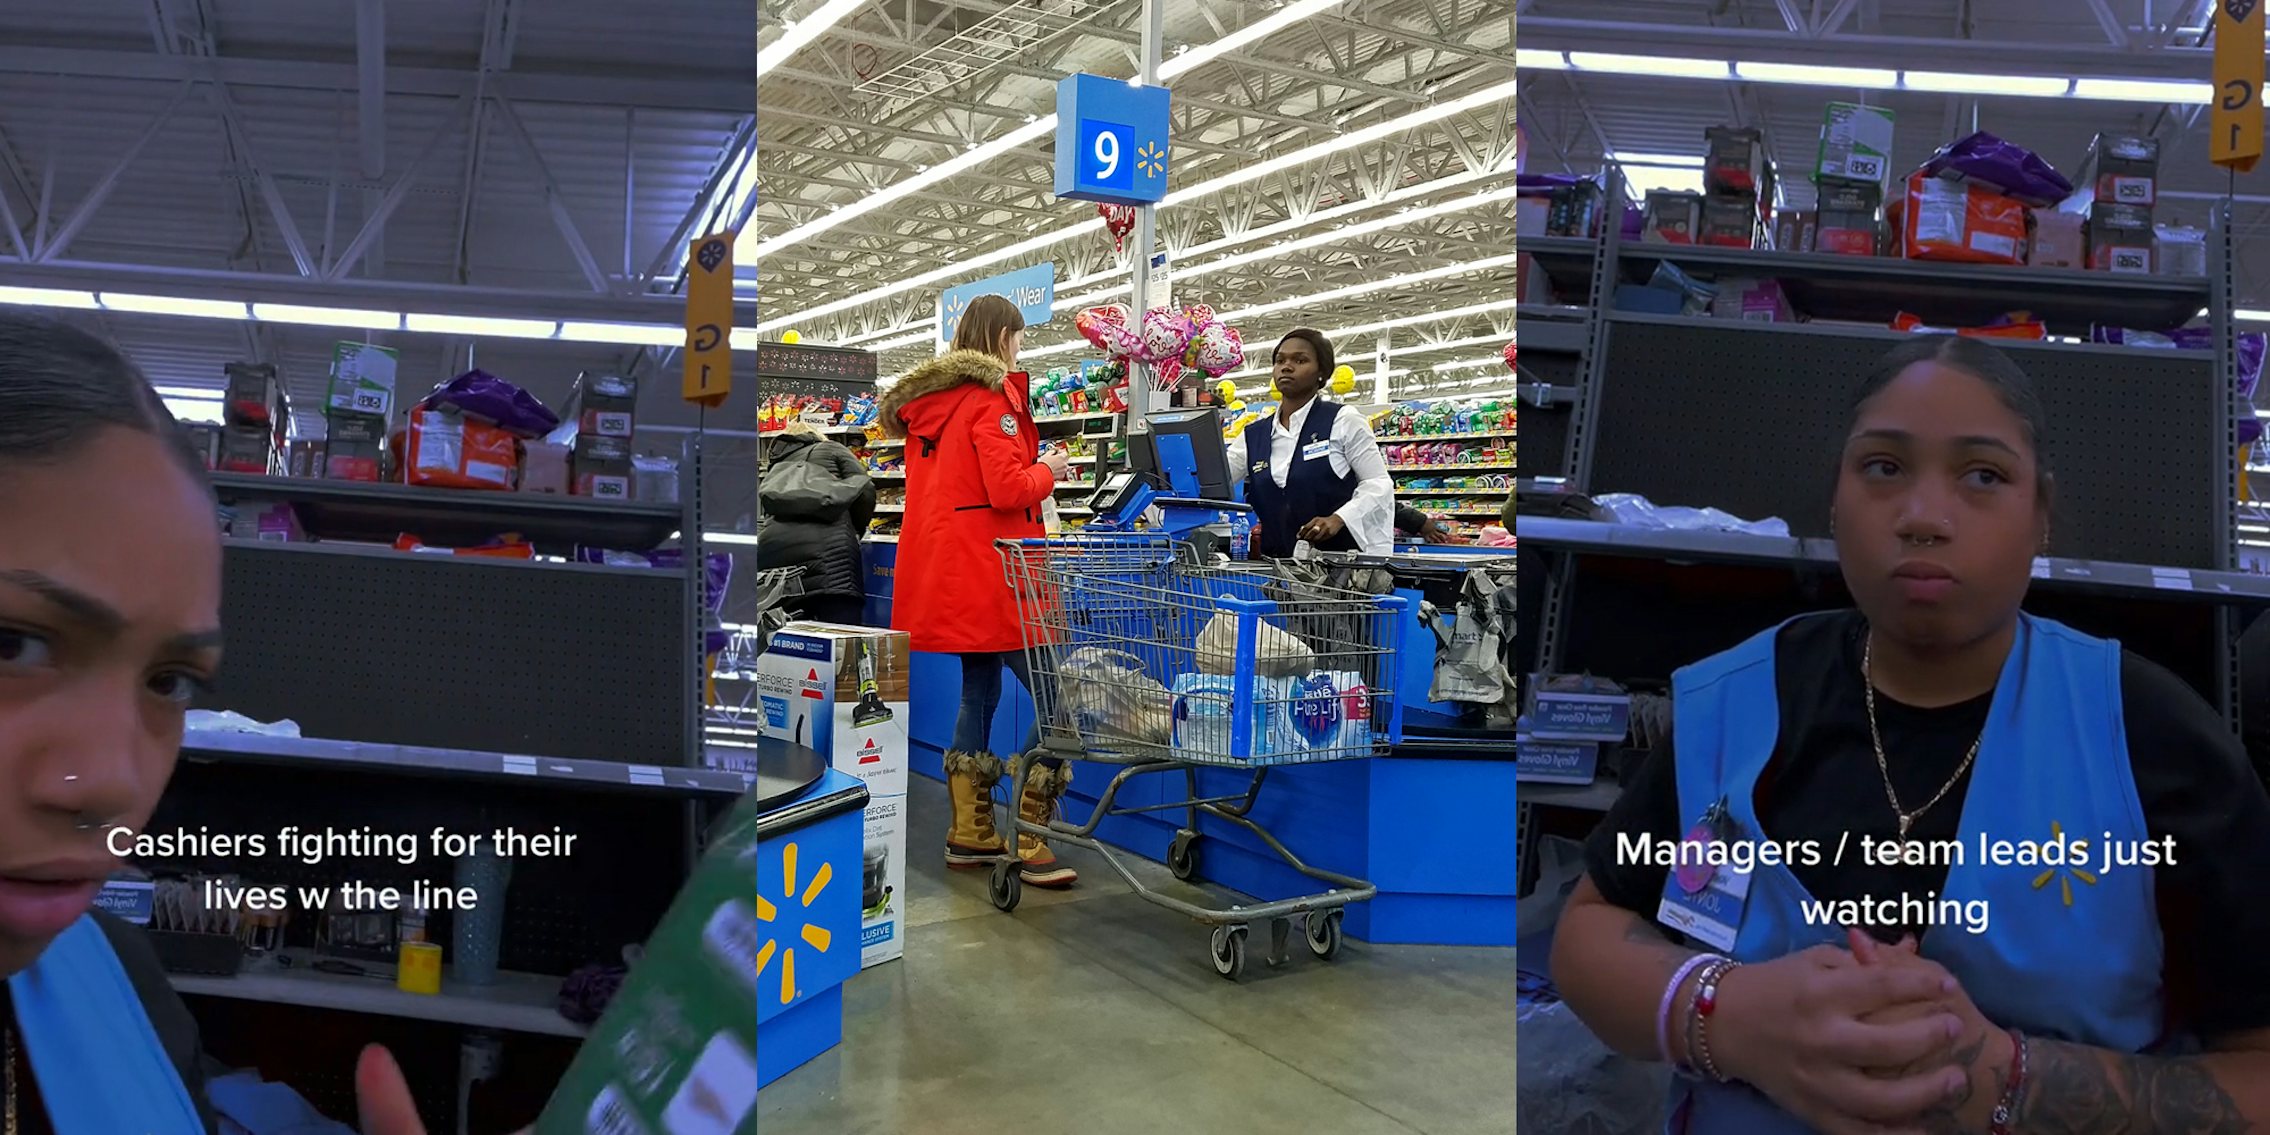 Walmart worker with caption 'Cashiers fighting for their lives w the line' (l) Walmart checkout (c) Walmart worker with caption 'Managers / team leads just watching' (r)